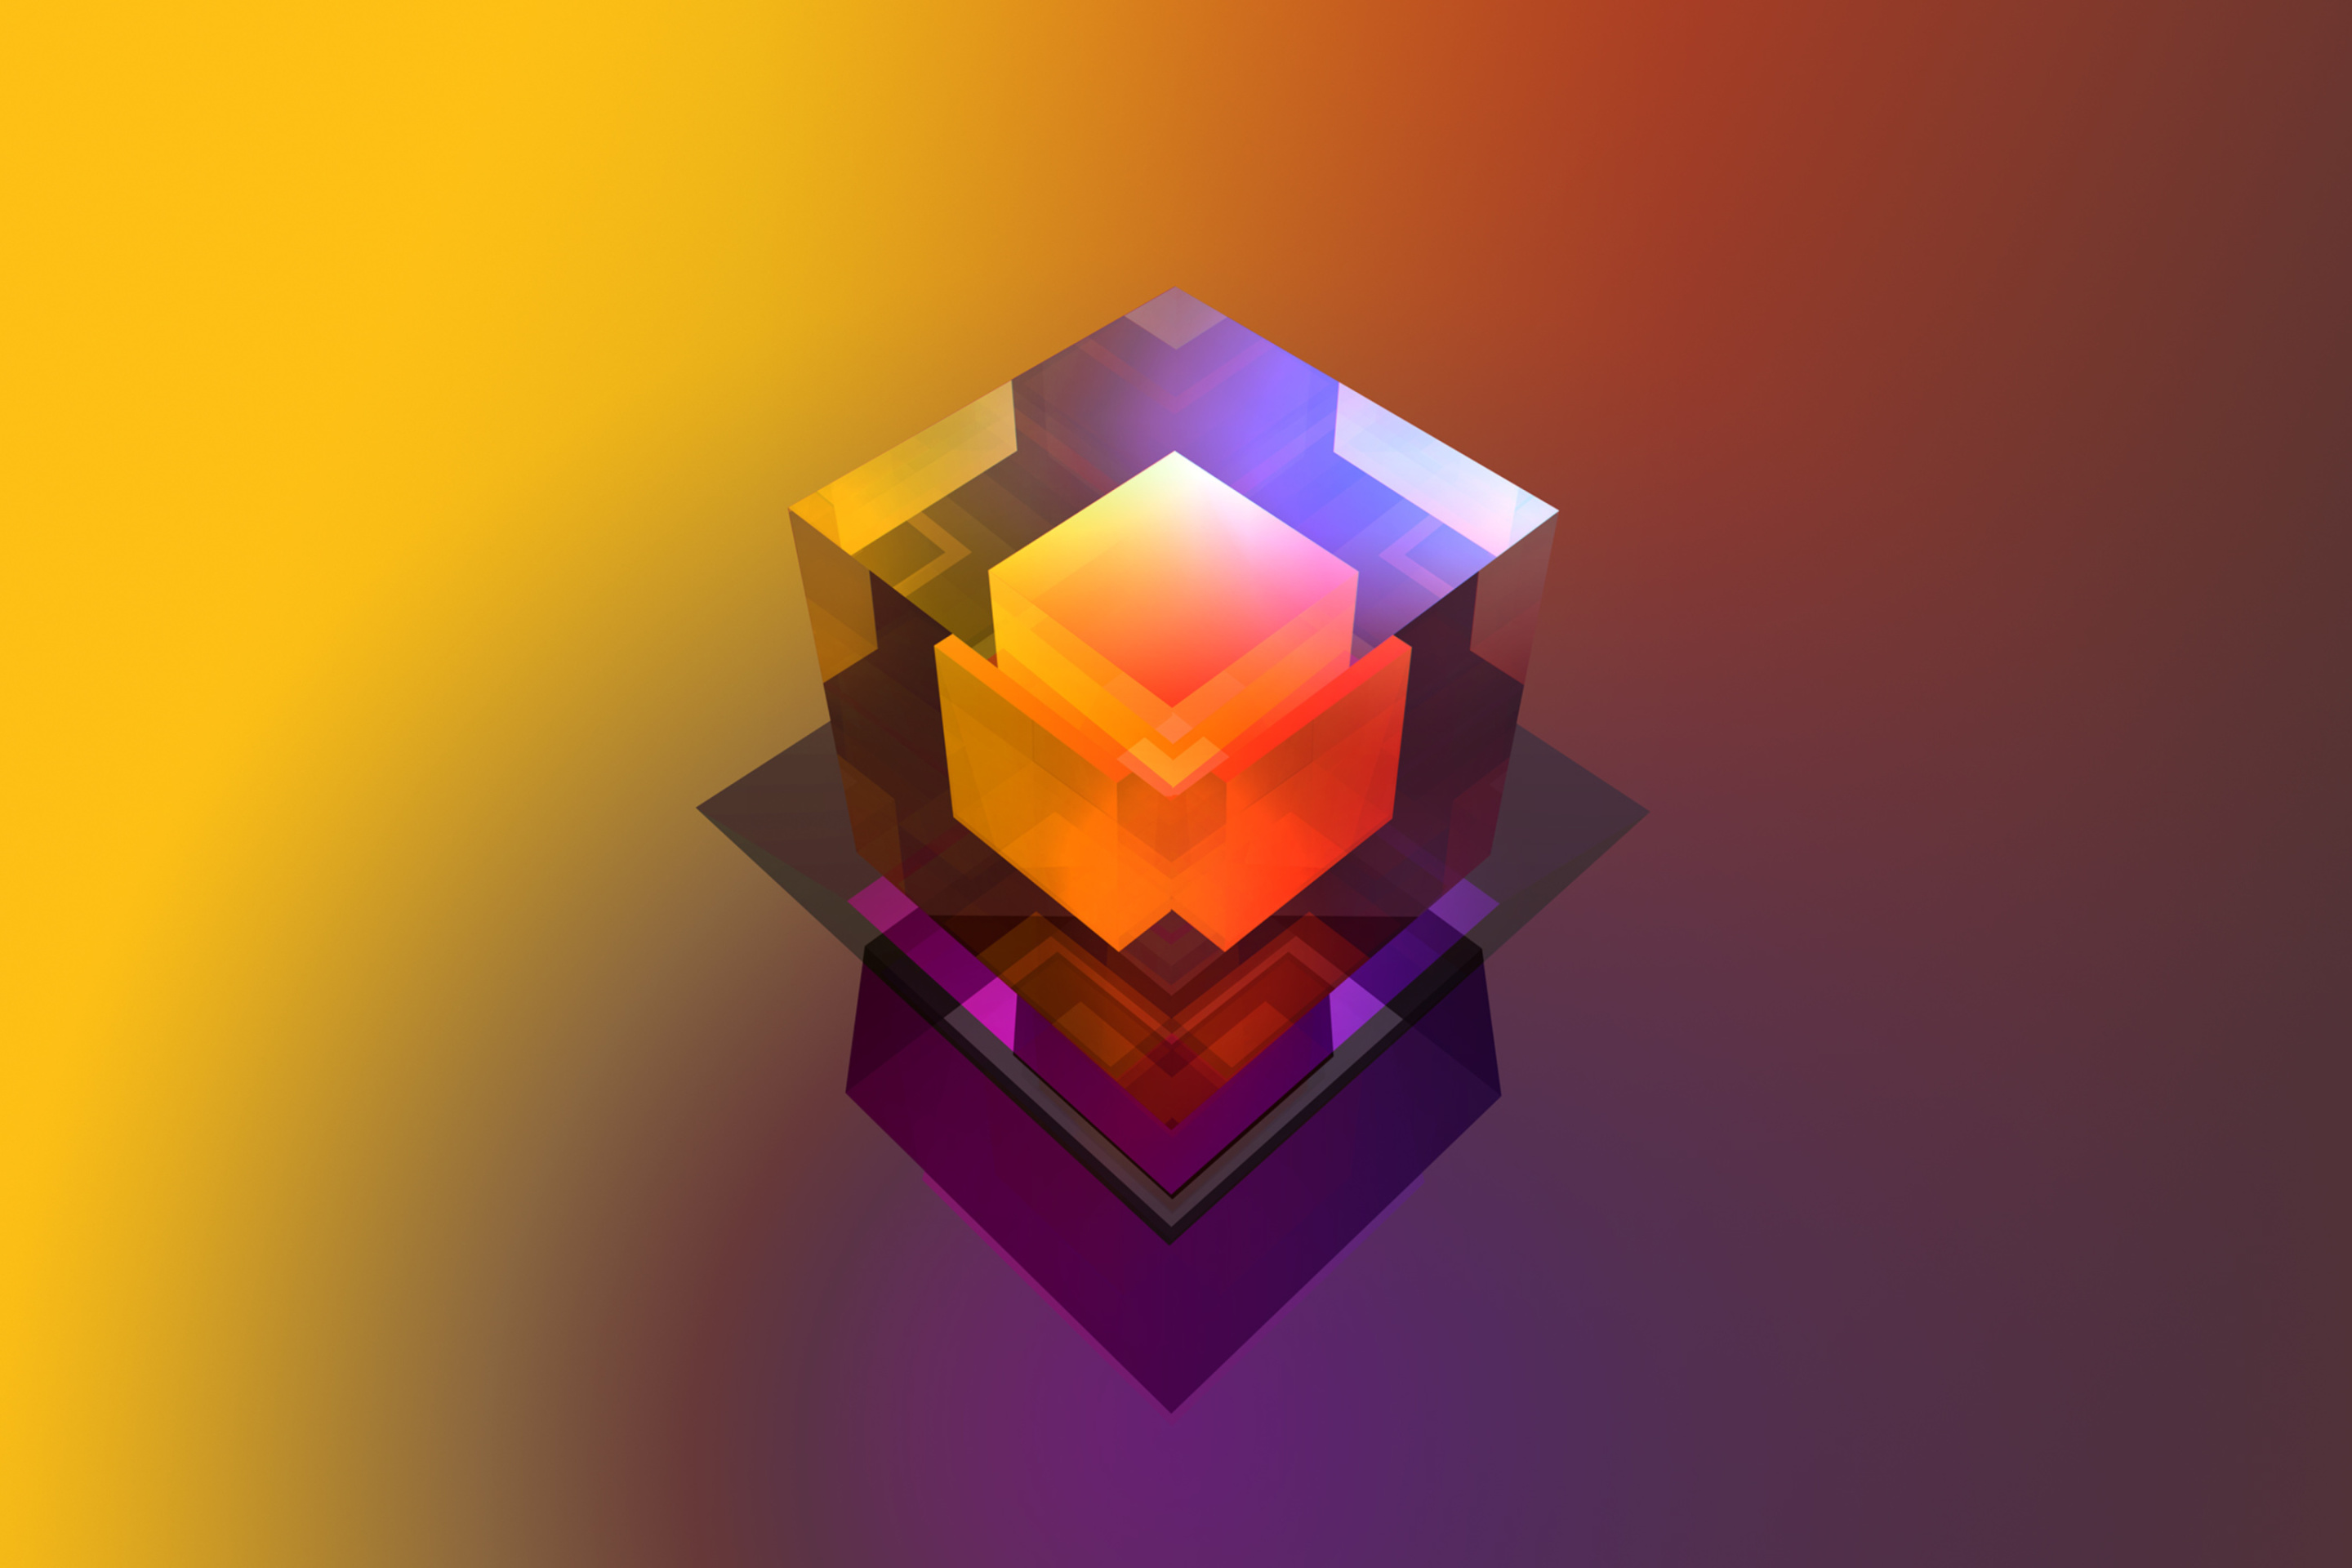 Colorful Cube wallpaper 2880x1920